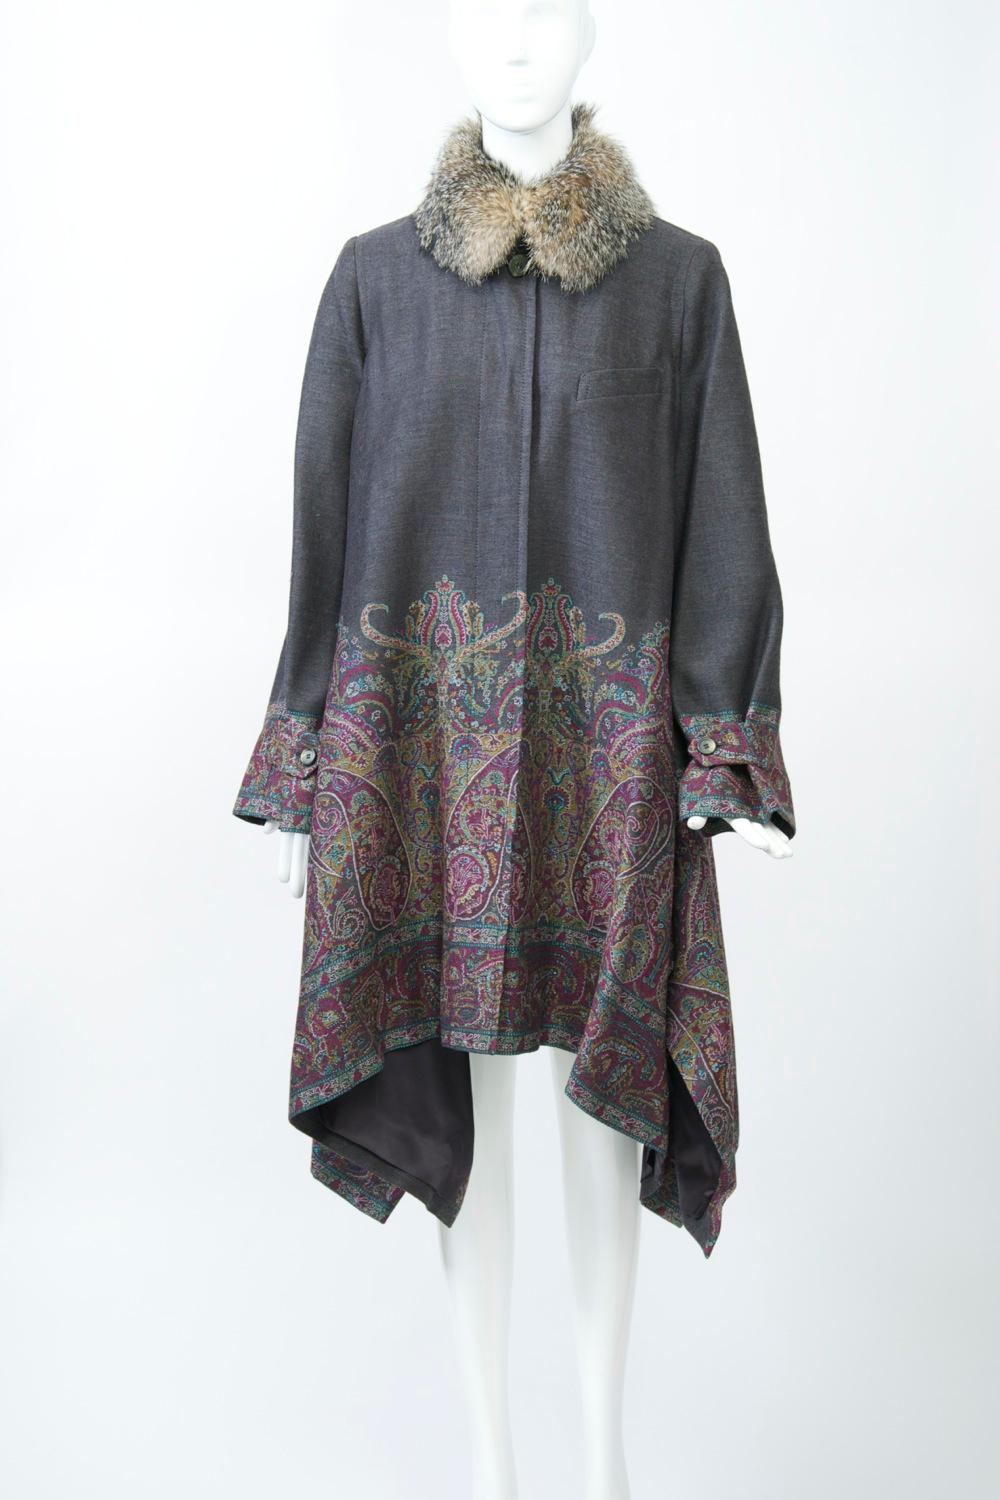 Etro coat in a charcoal gray wool blend featuring a multicolored paisley design on the bottom half of the body and around the wrists of the sleeves, along with a silver fox collar (which can be removed, as there is a regular collar underneath). A